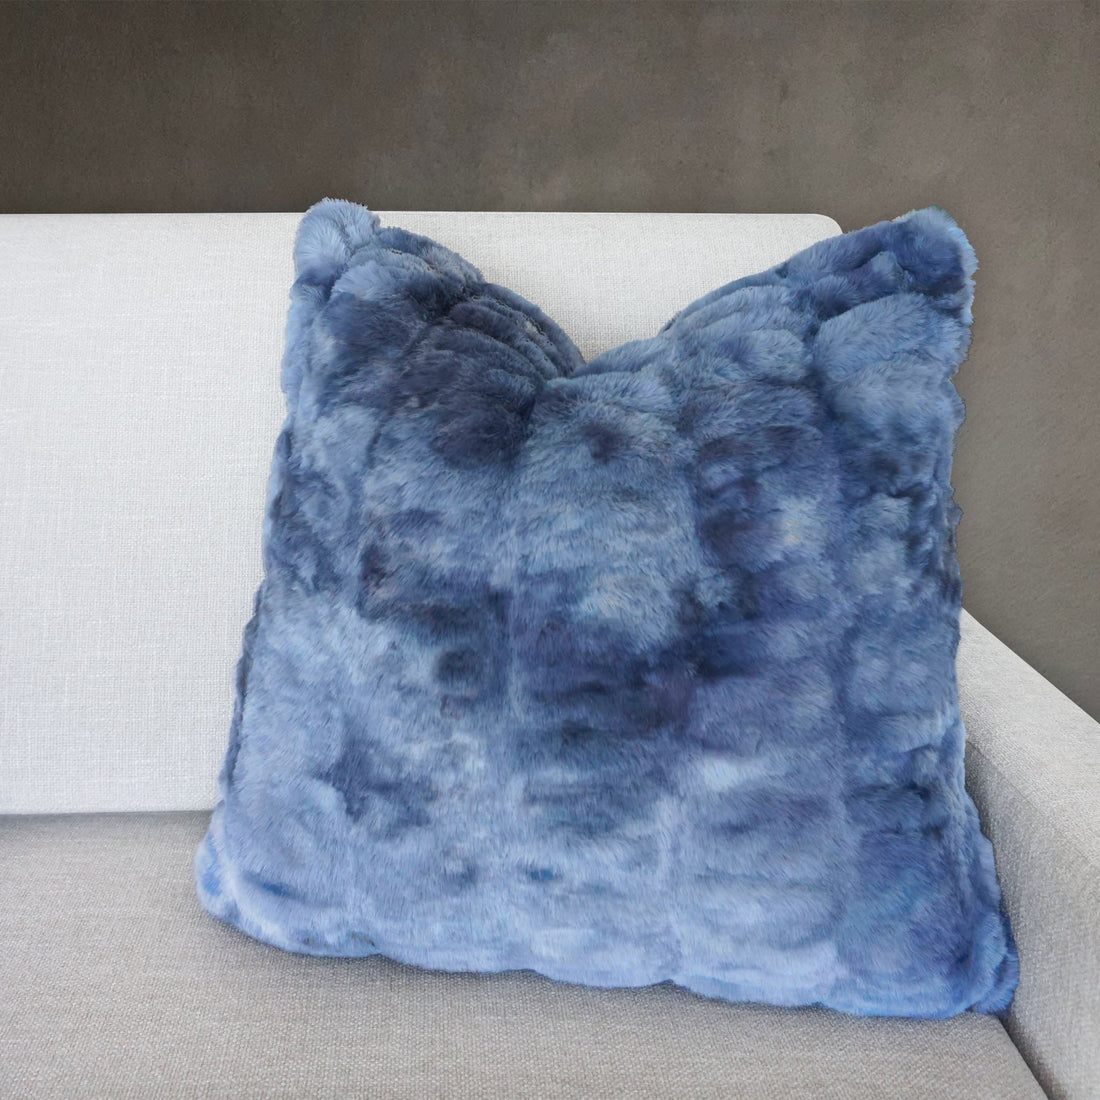 Ruched Tie Dye Faux Fur Throw Pillow Cover | 20" x 20"